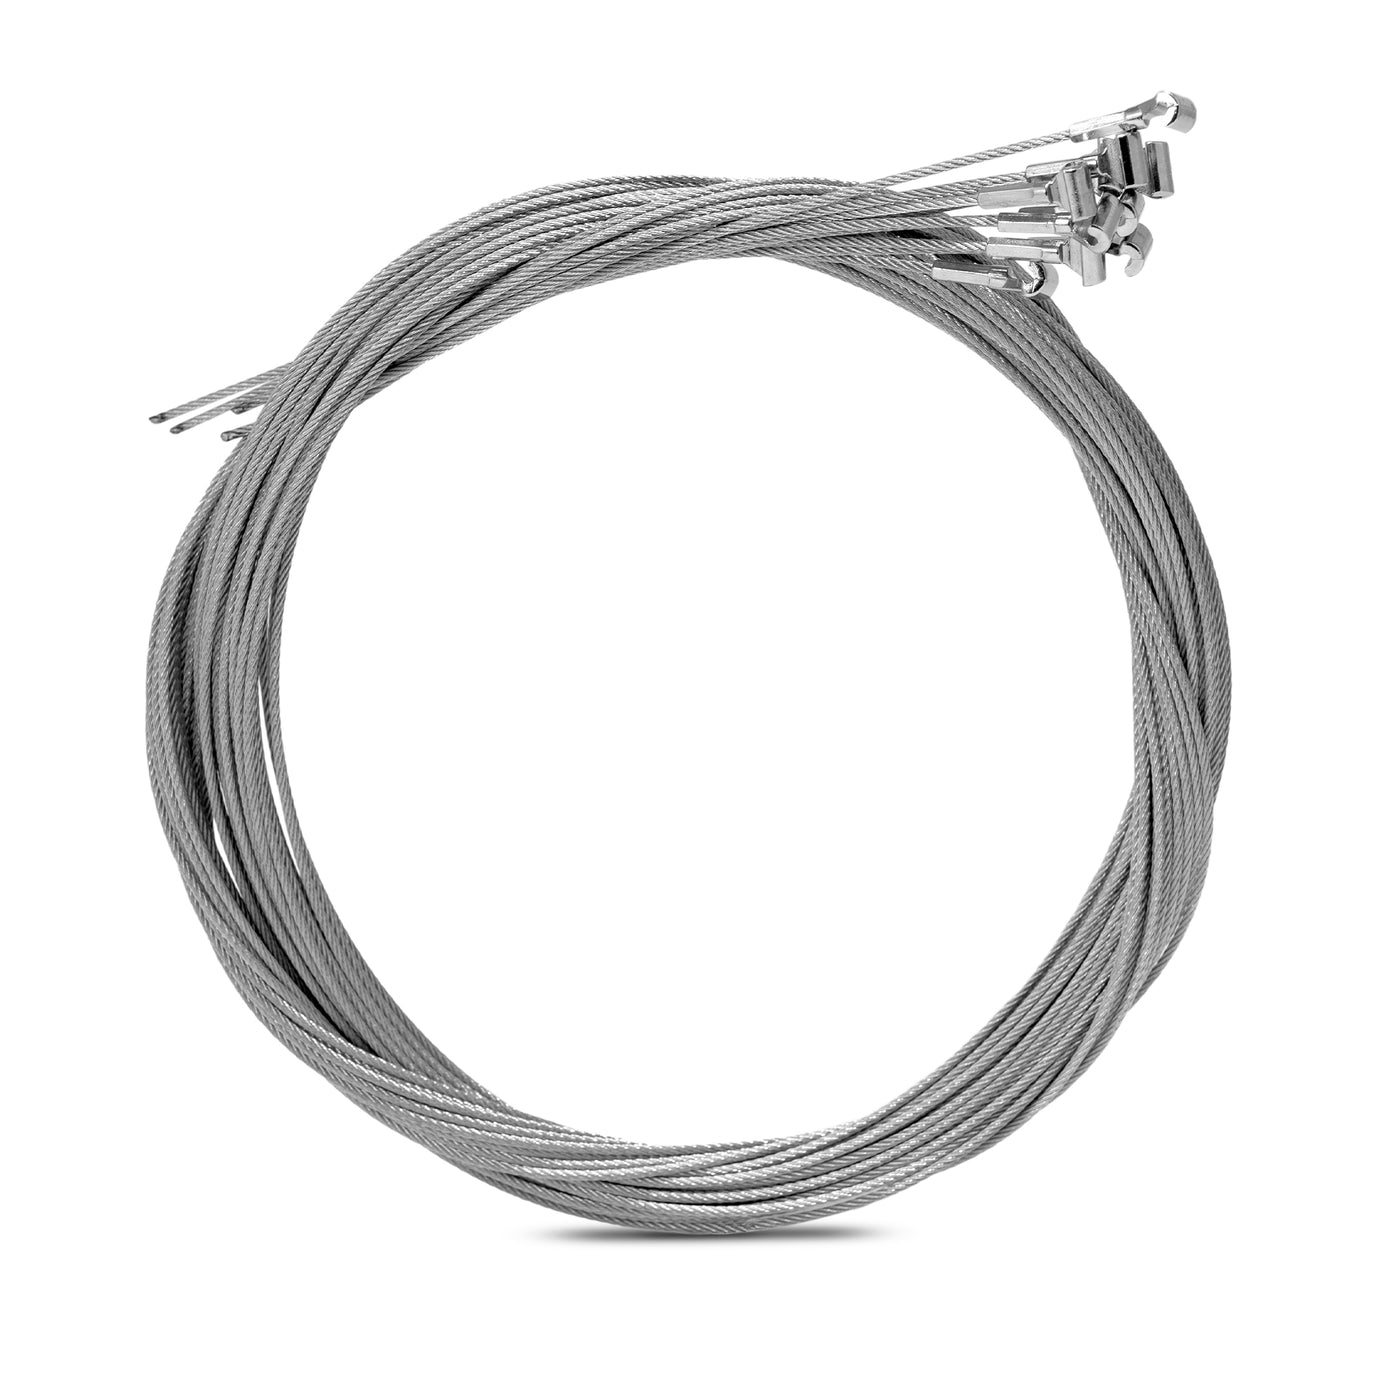 MINIRAIL CABLE  Silver stainless steel 300cm. Capacity up to 25kg (LSC3)